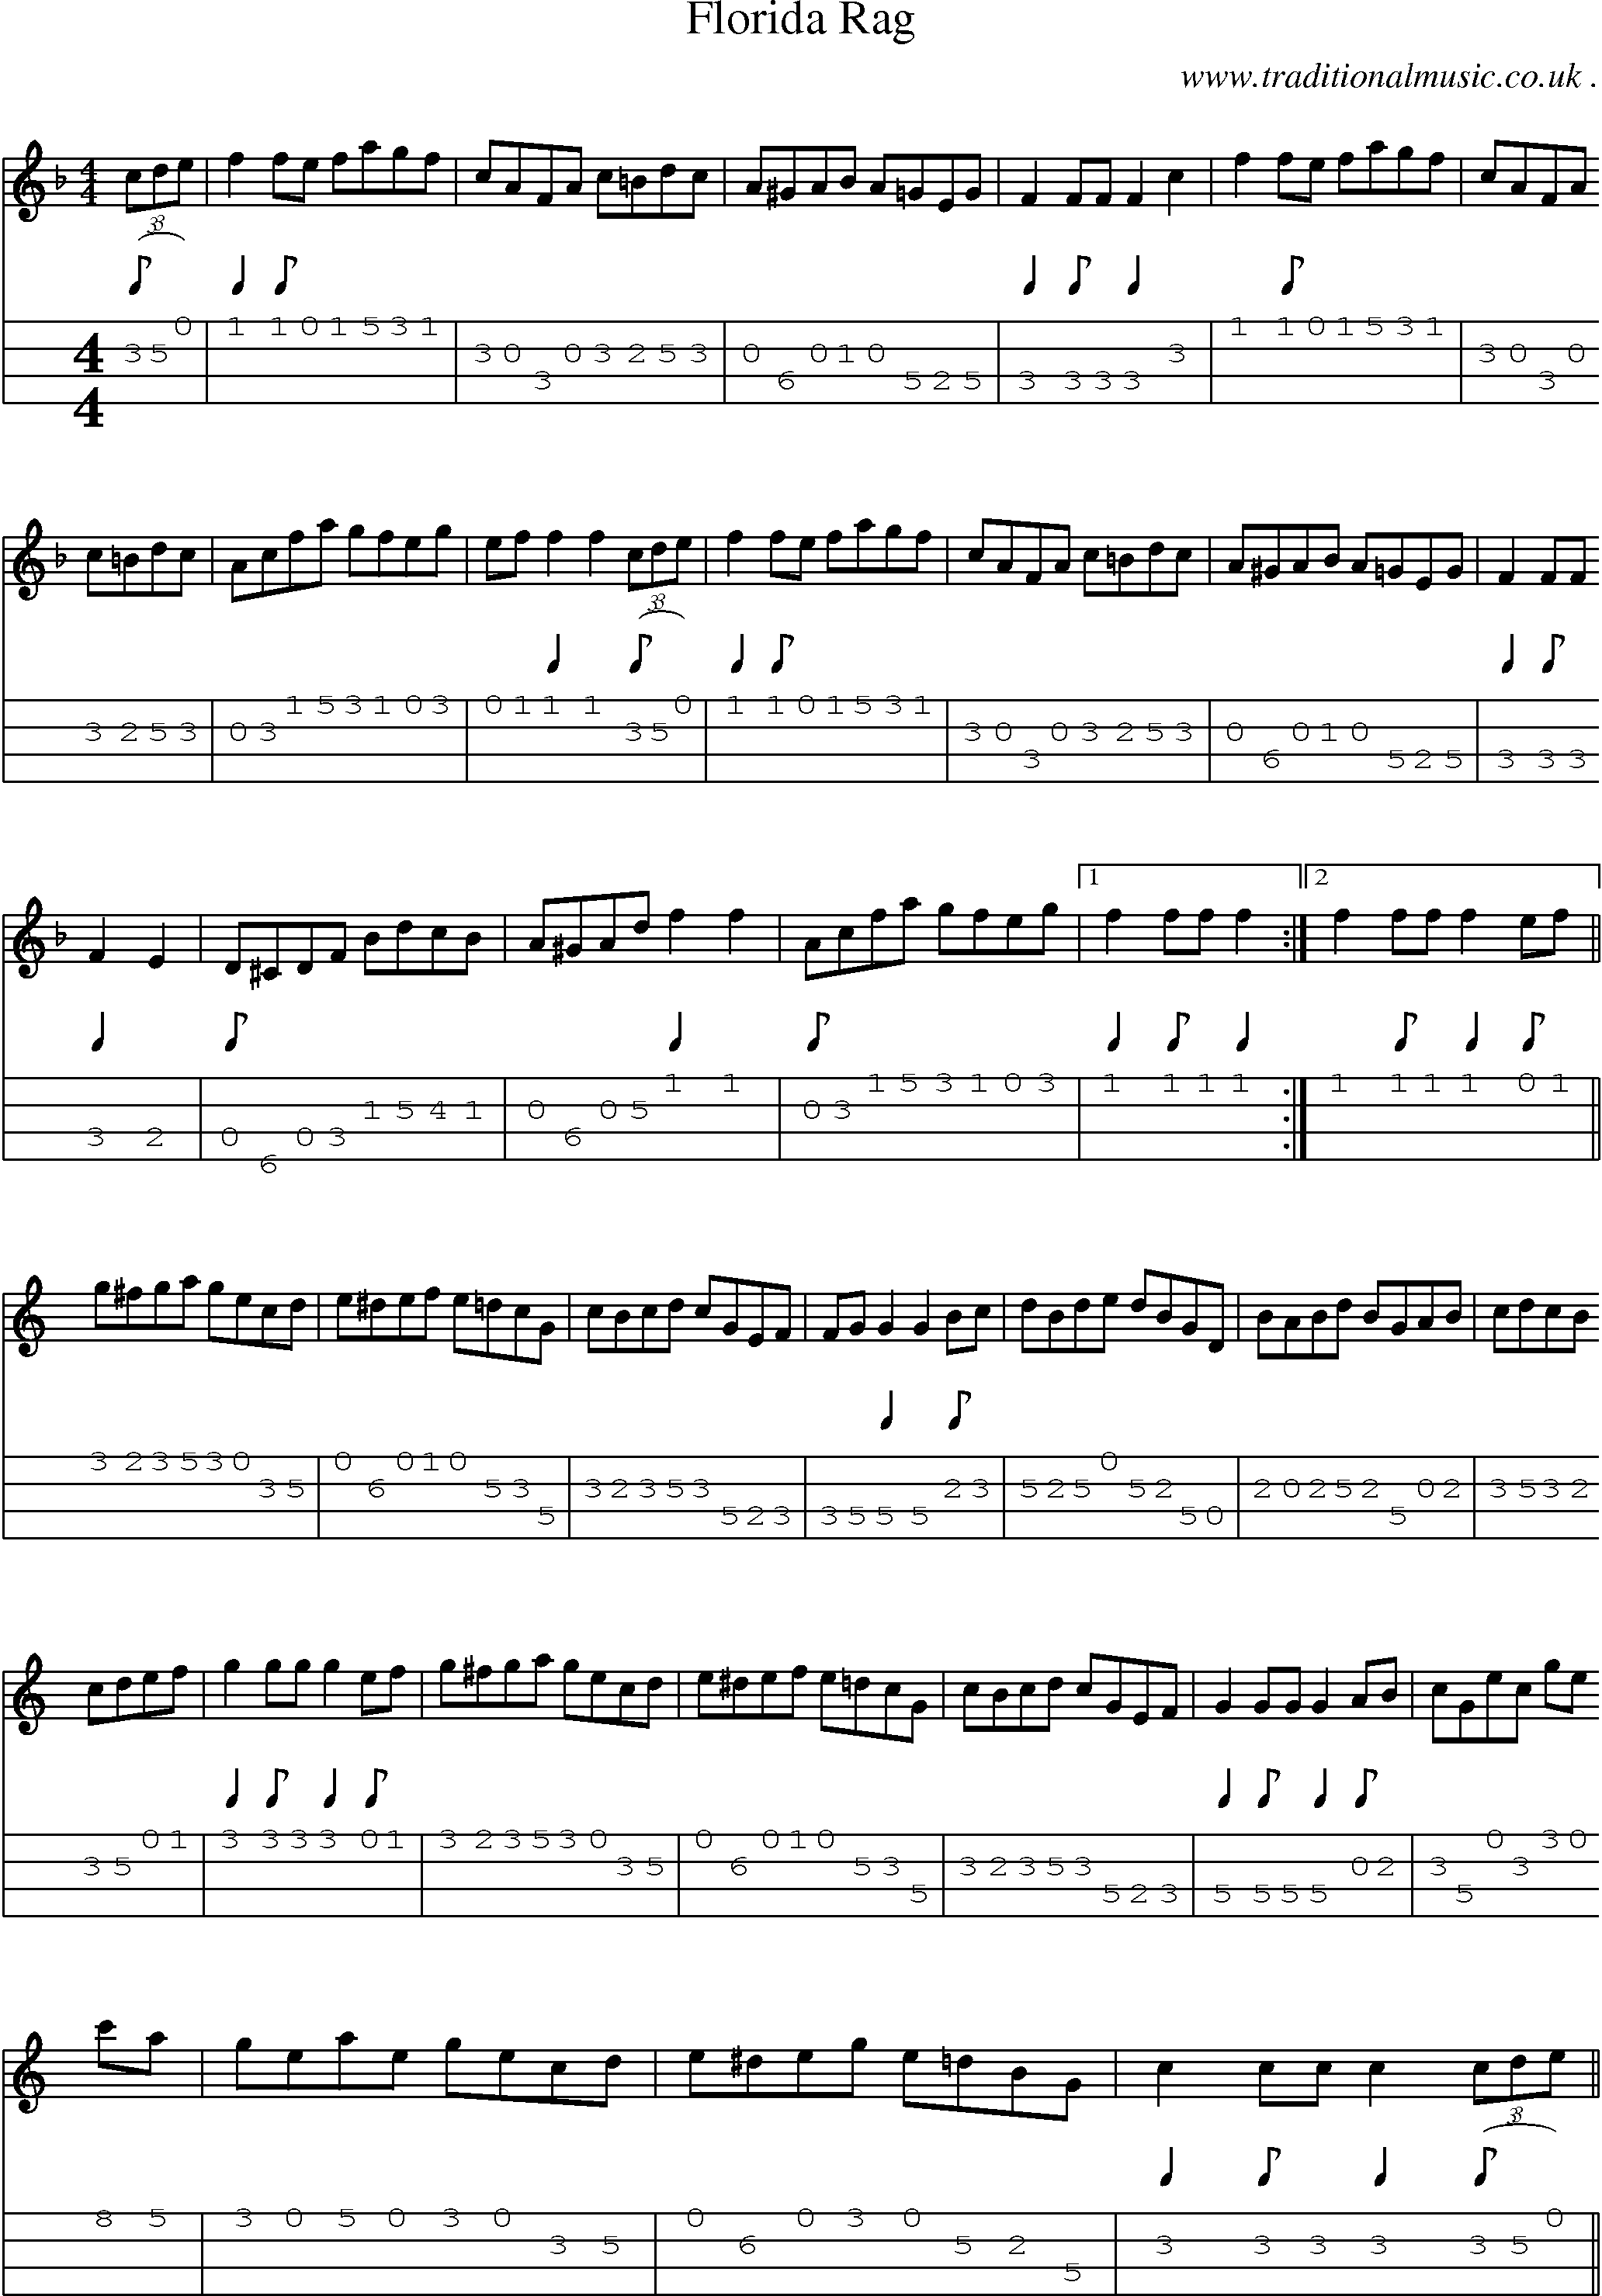 Music Score and Mandolin Tabs for Florida Rag